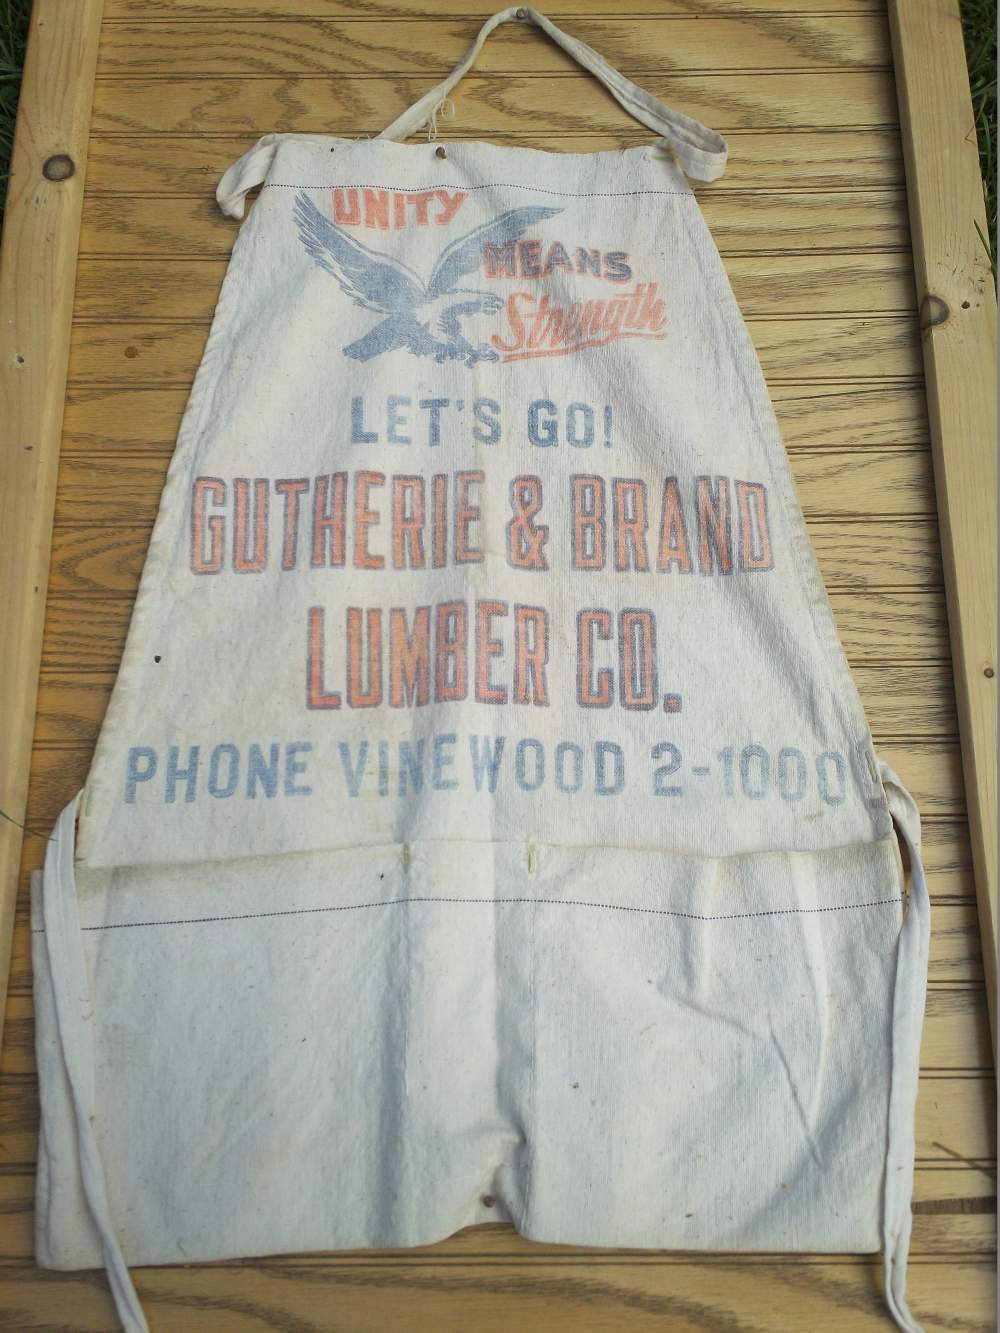 Name:  GLC Gutherie and Brand Lumber.jpg
Views: 801
Size:  142.7 KB